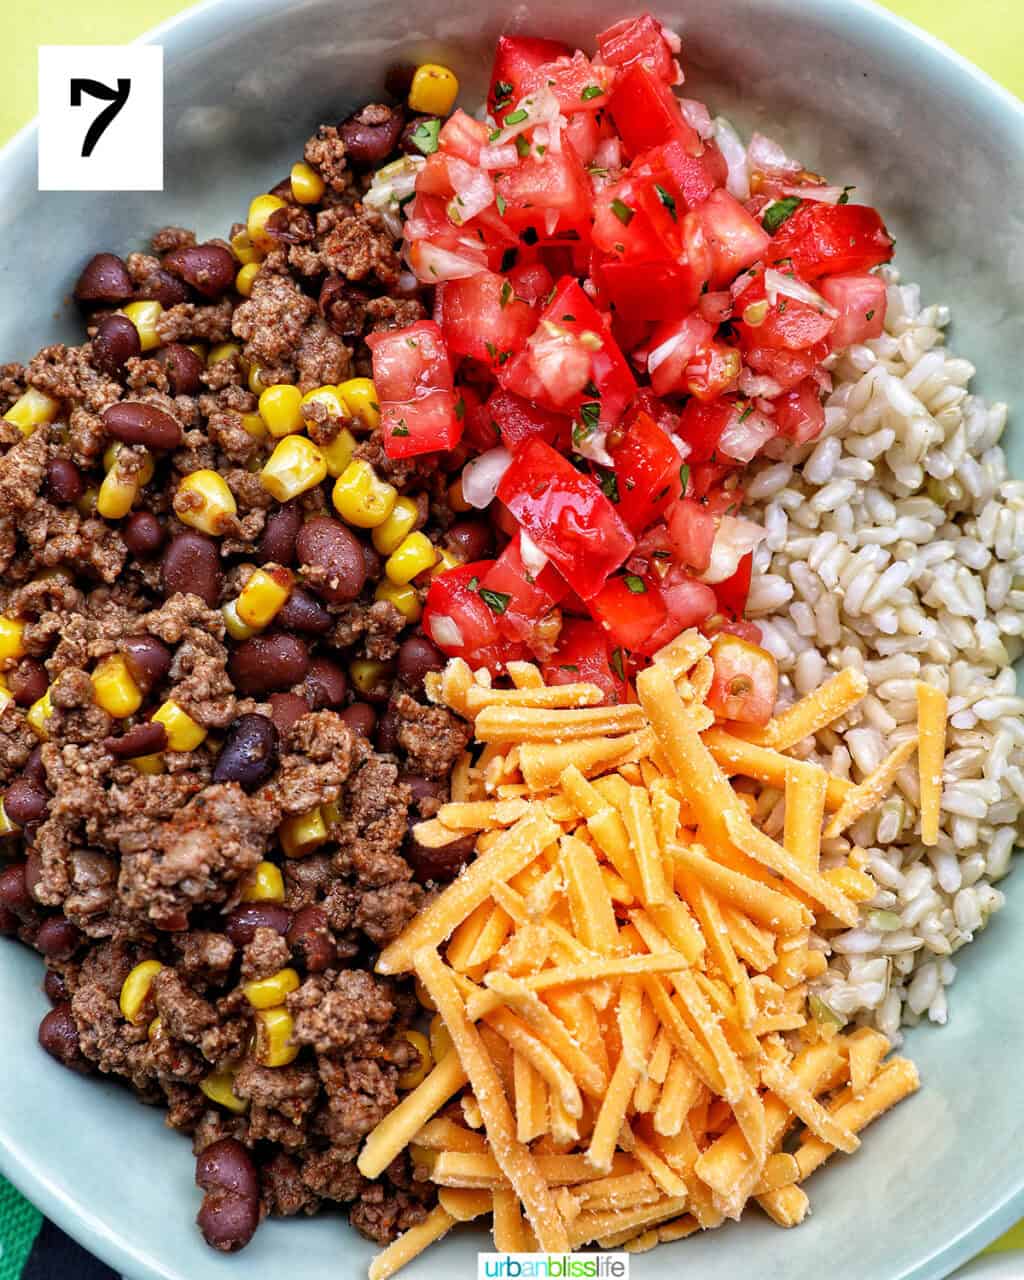 taco bowl of brown rice, beef, beans, corn, tomatoes, cheese.